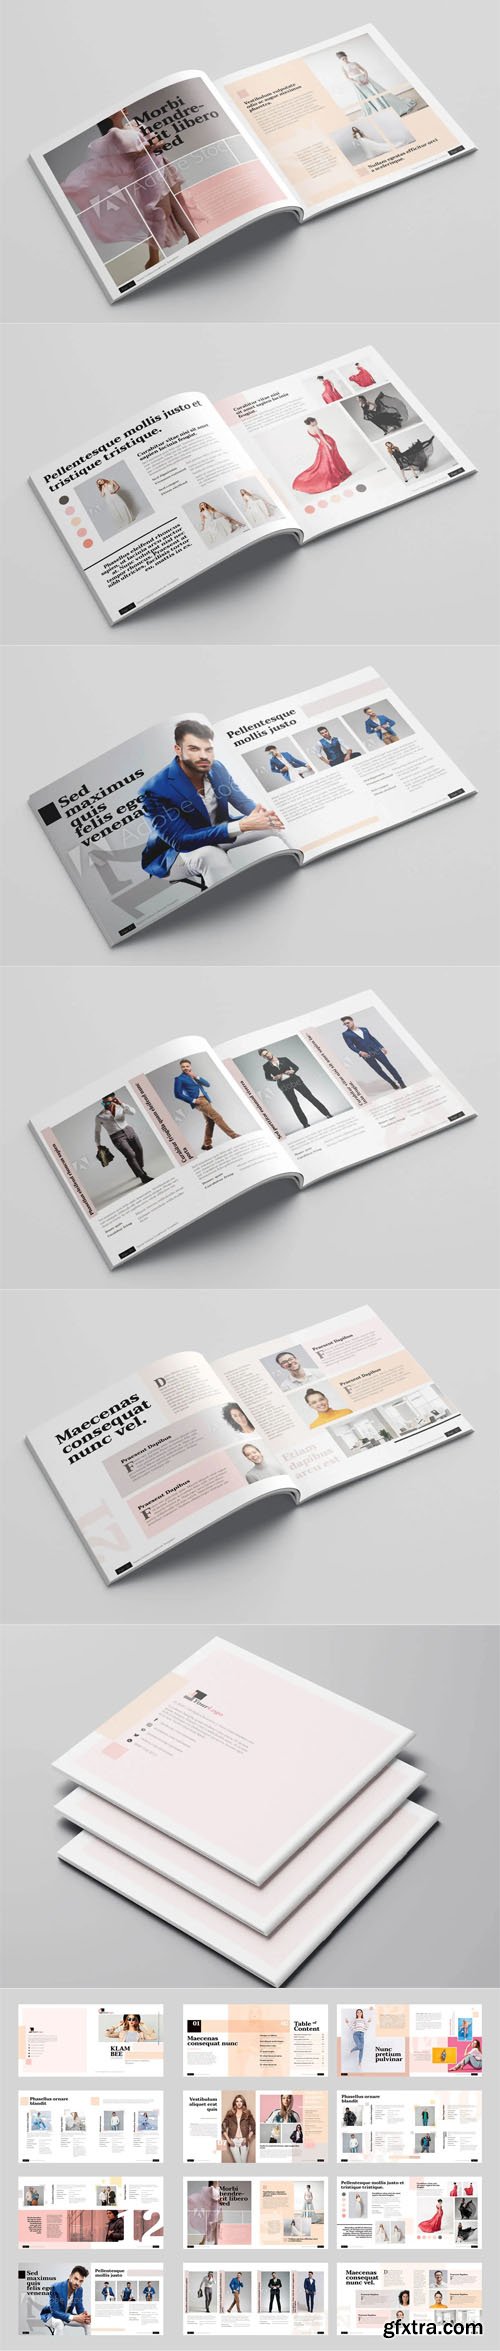 KLAMBEE - Square Fashion Lookbook INDD Template [24 Pages] [Re-Up]